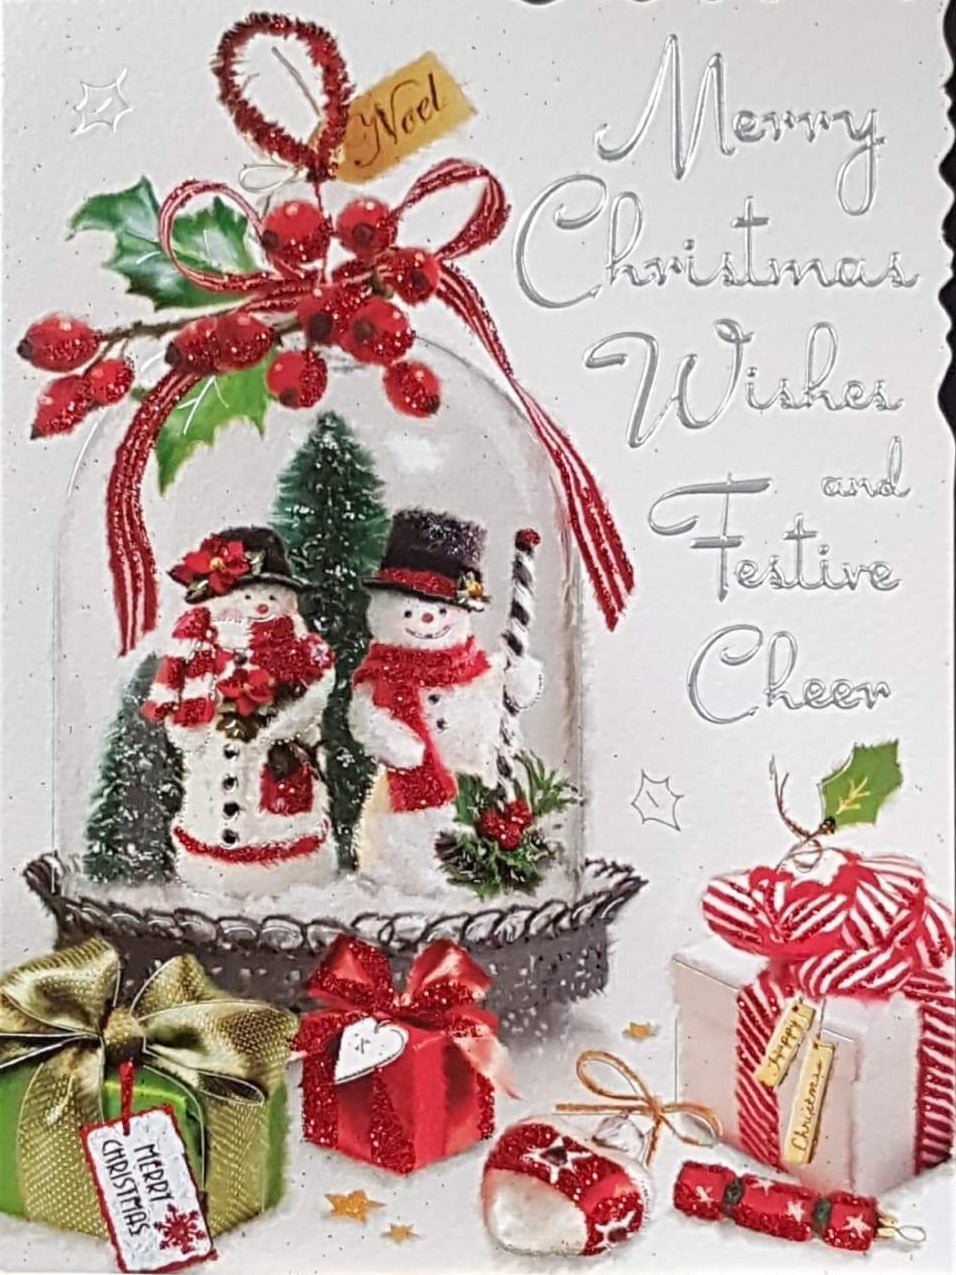 General Christmas Card - Christmas Wishes & Festive Cheer & Snowmen in Snowglobe